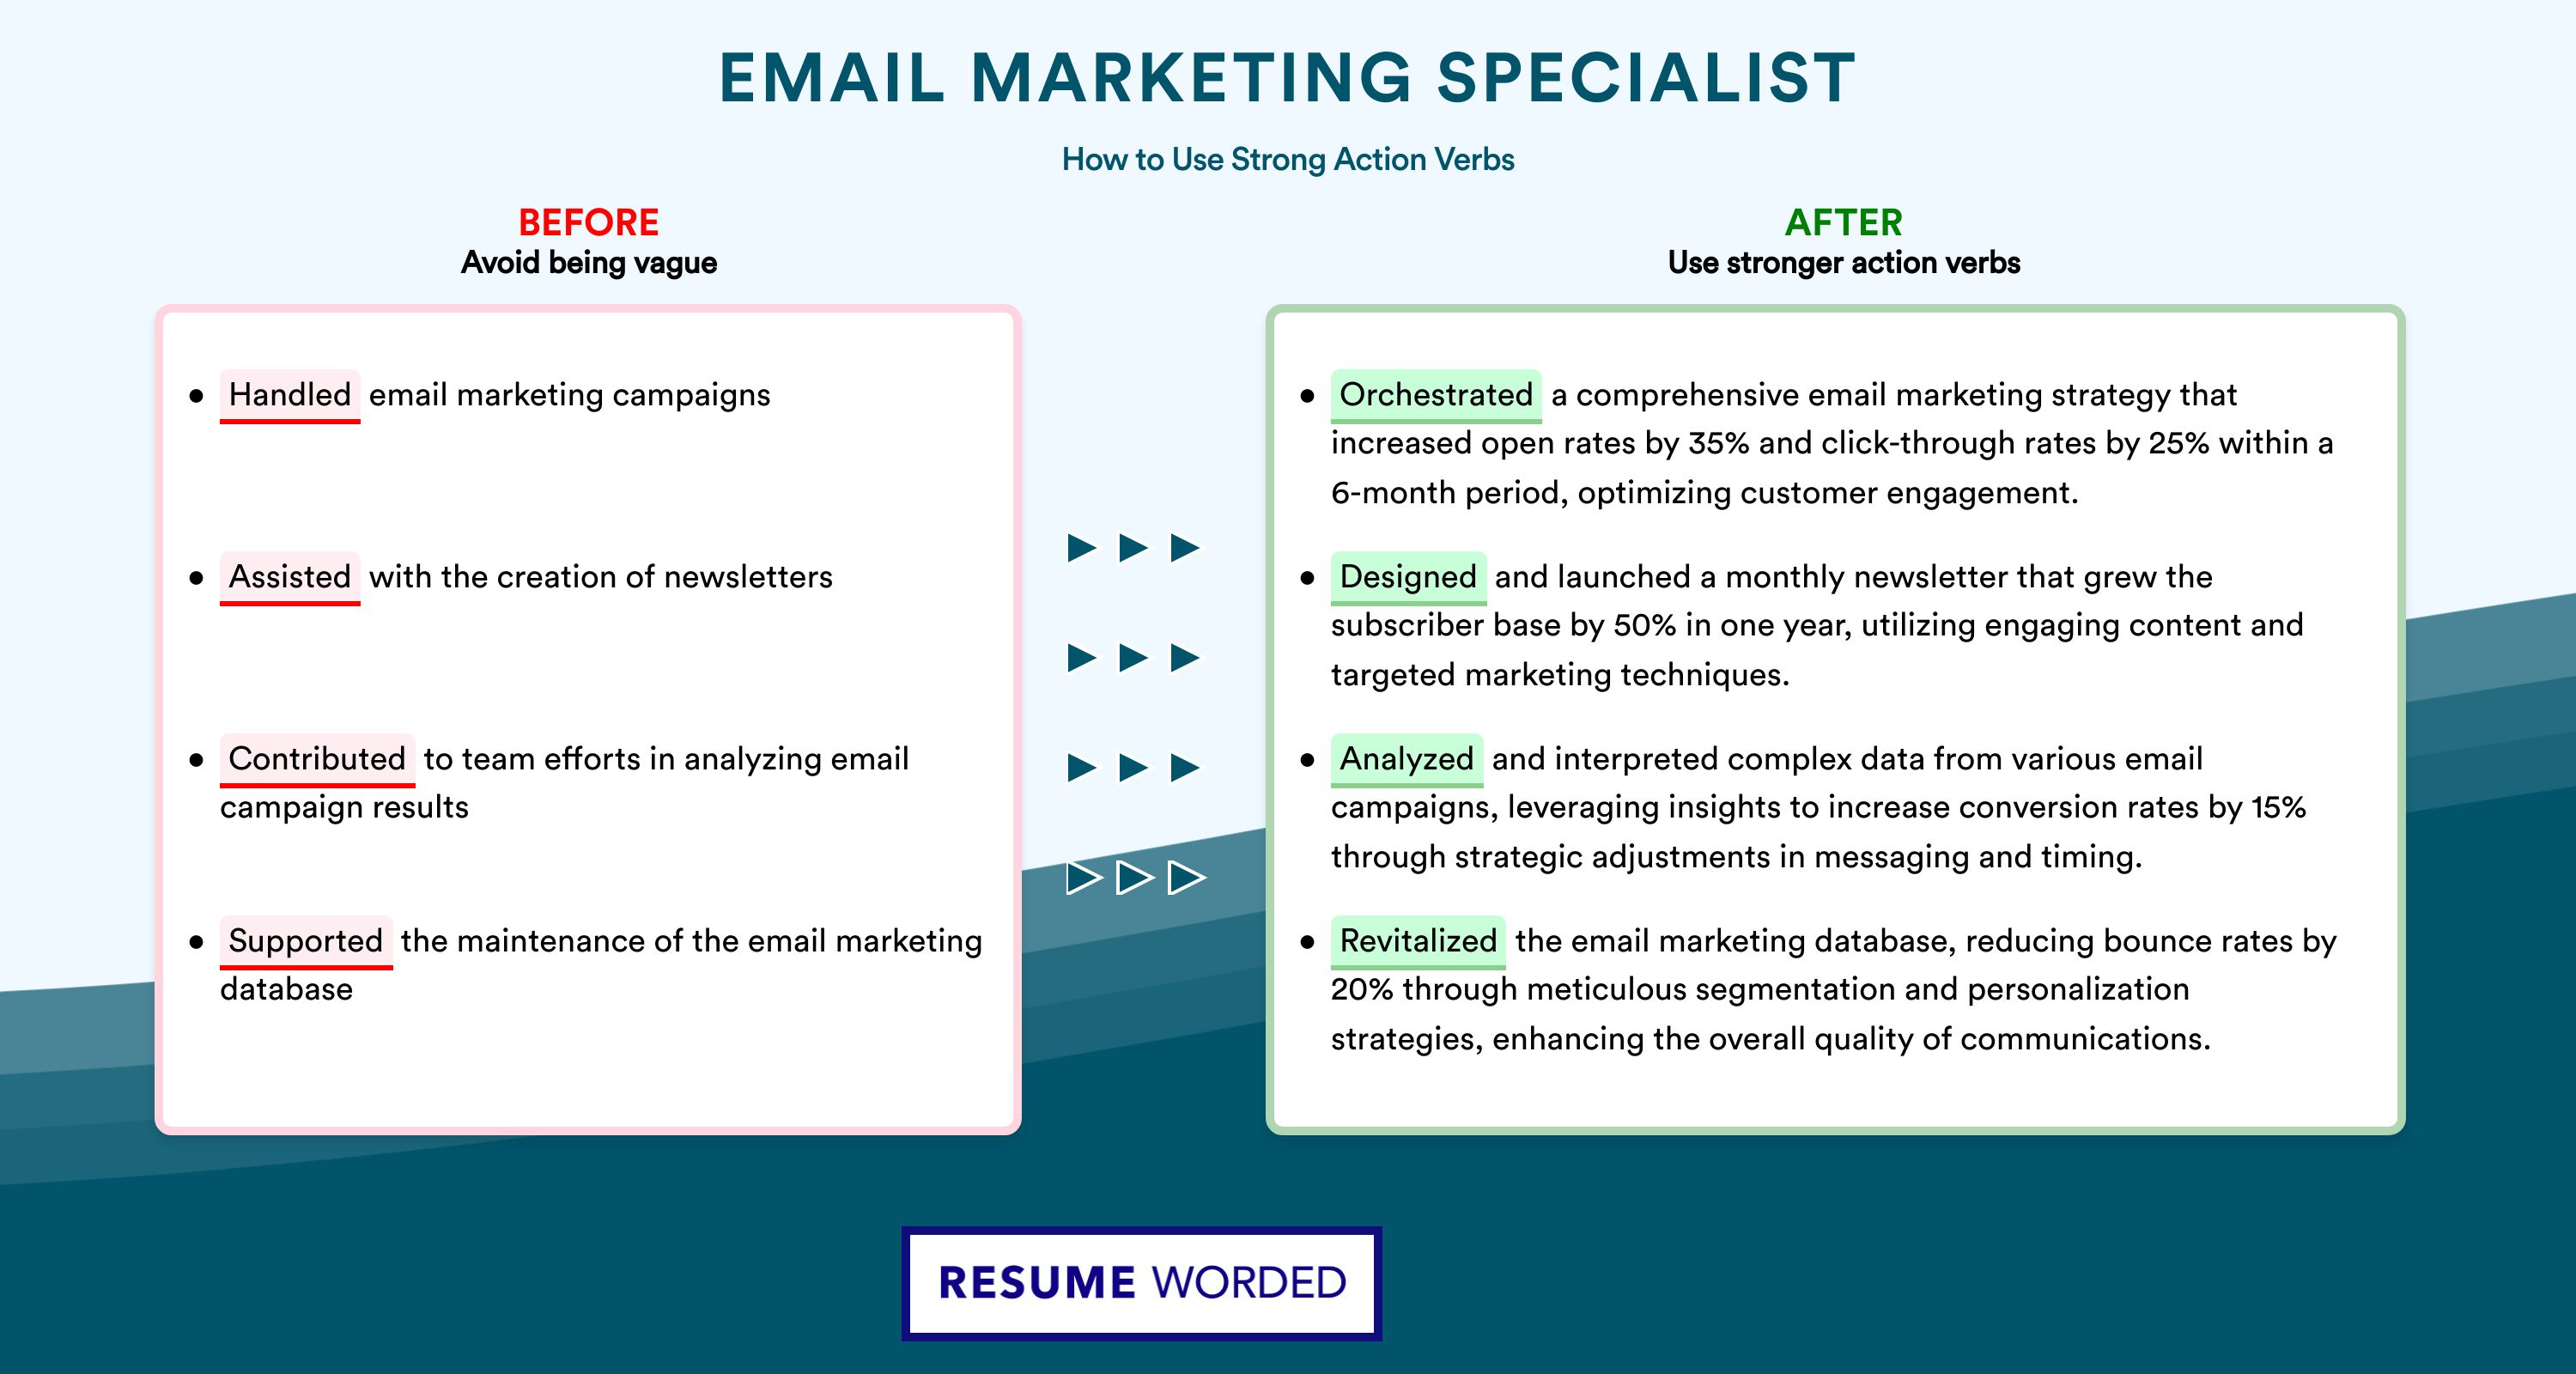 Action Verbs for Email Marketing Specialist